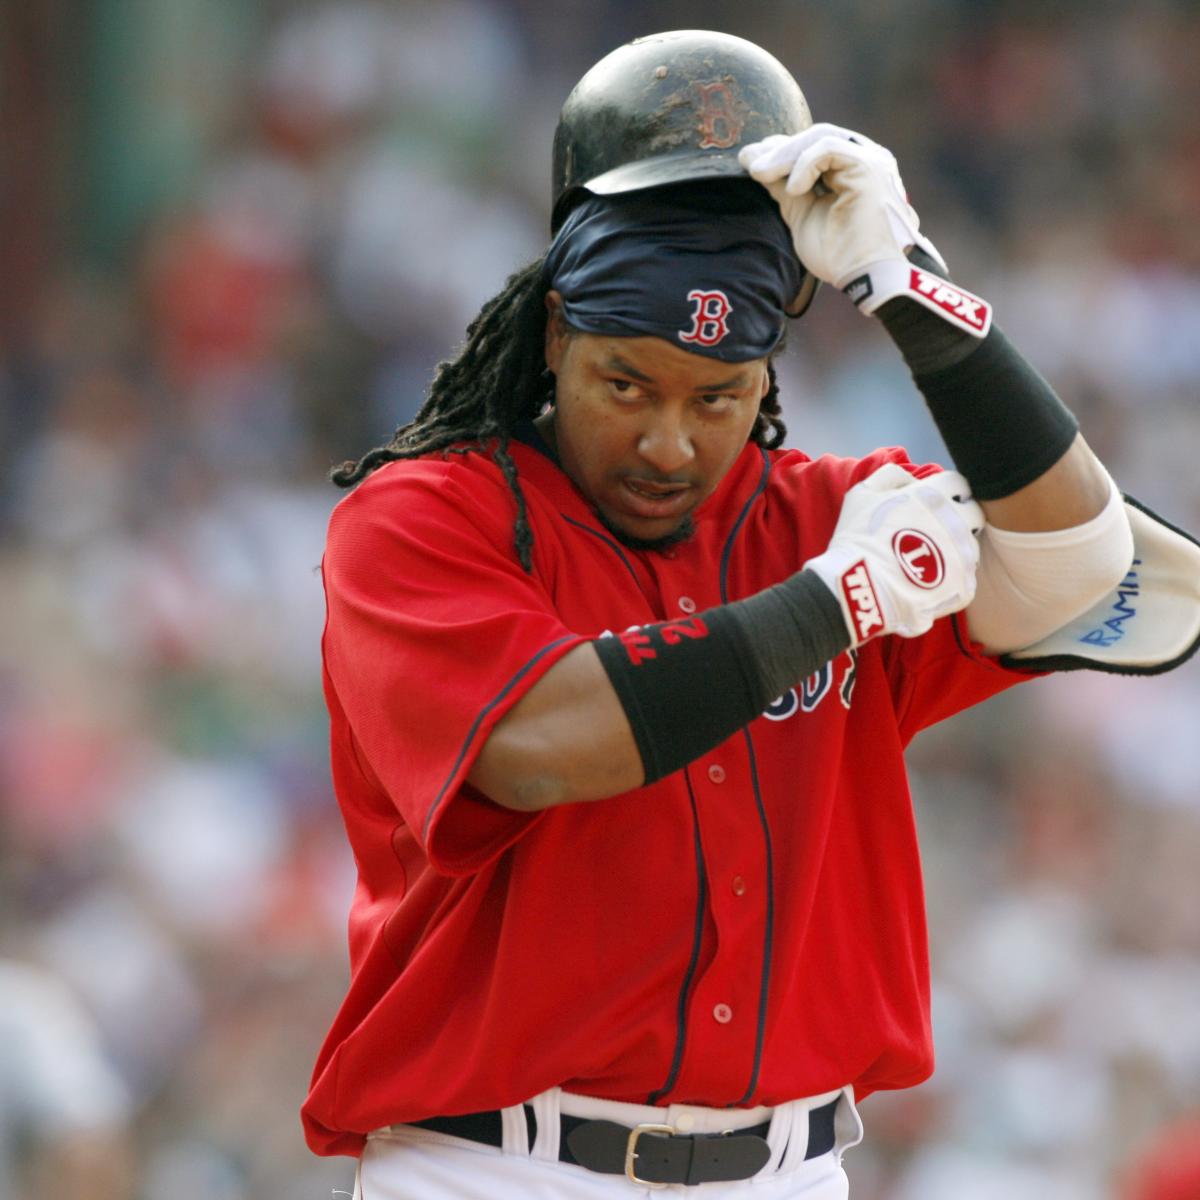 Manny Ramirez signs contract with Taiwan team - The San Diego